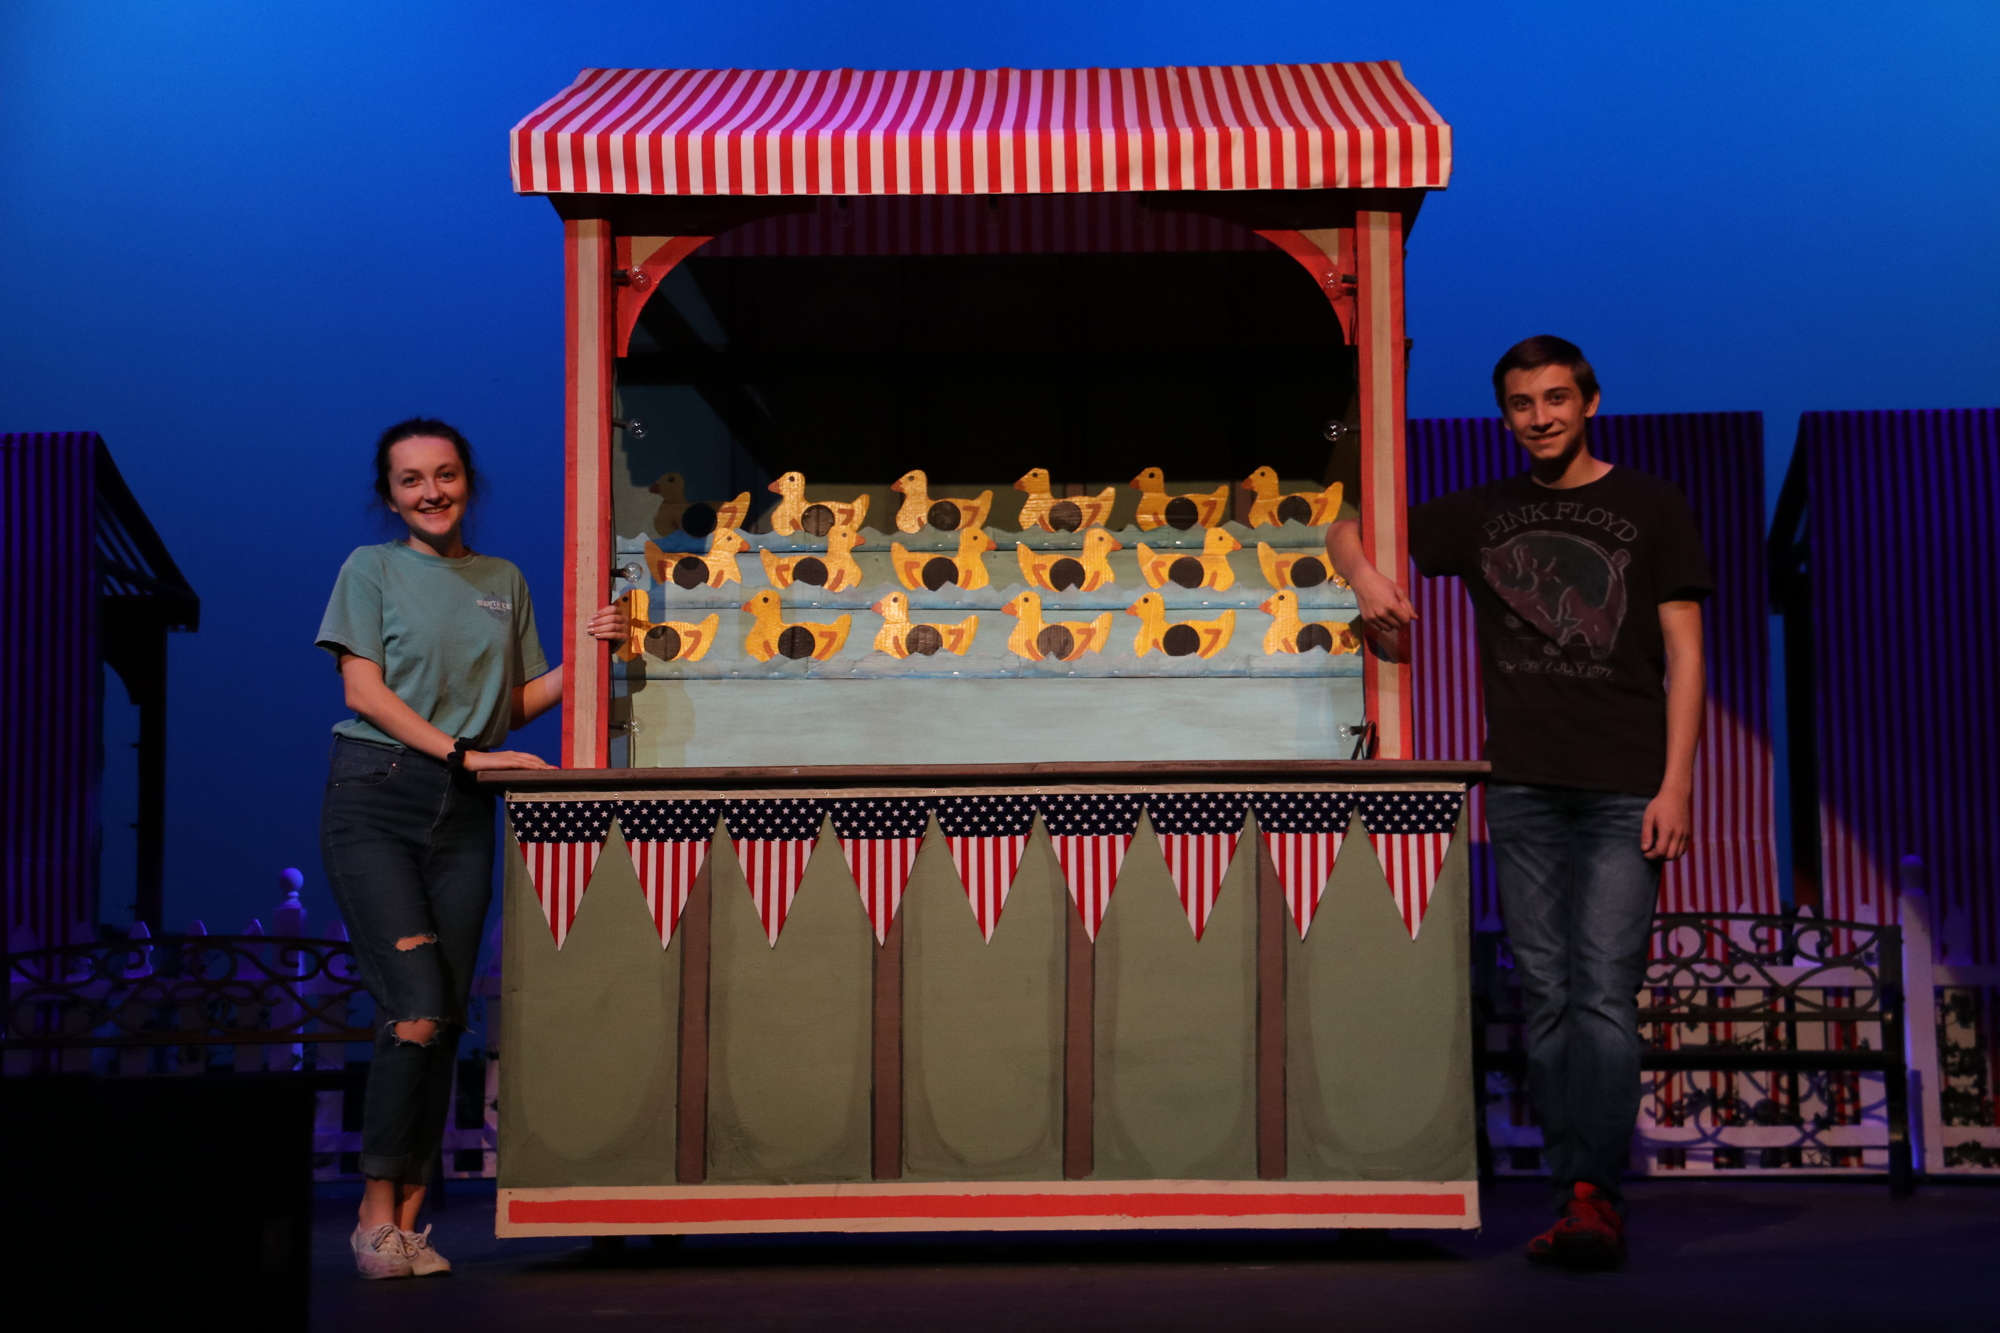 Junior Abby Marotta, left, and freshman Zach Miles are cast as two members of the Frake family in “State Fair.” Marotta plays Margy Frake, and Miles plays her character’s father, Abel.